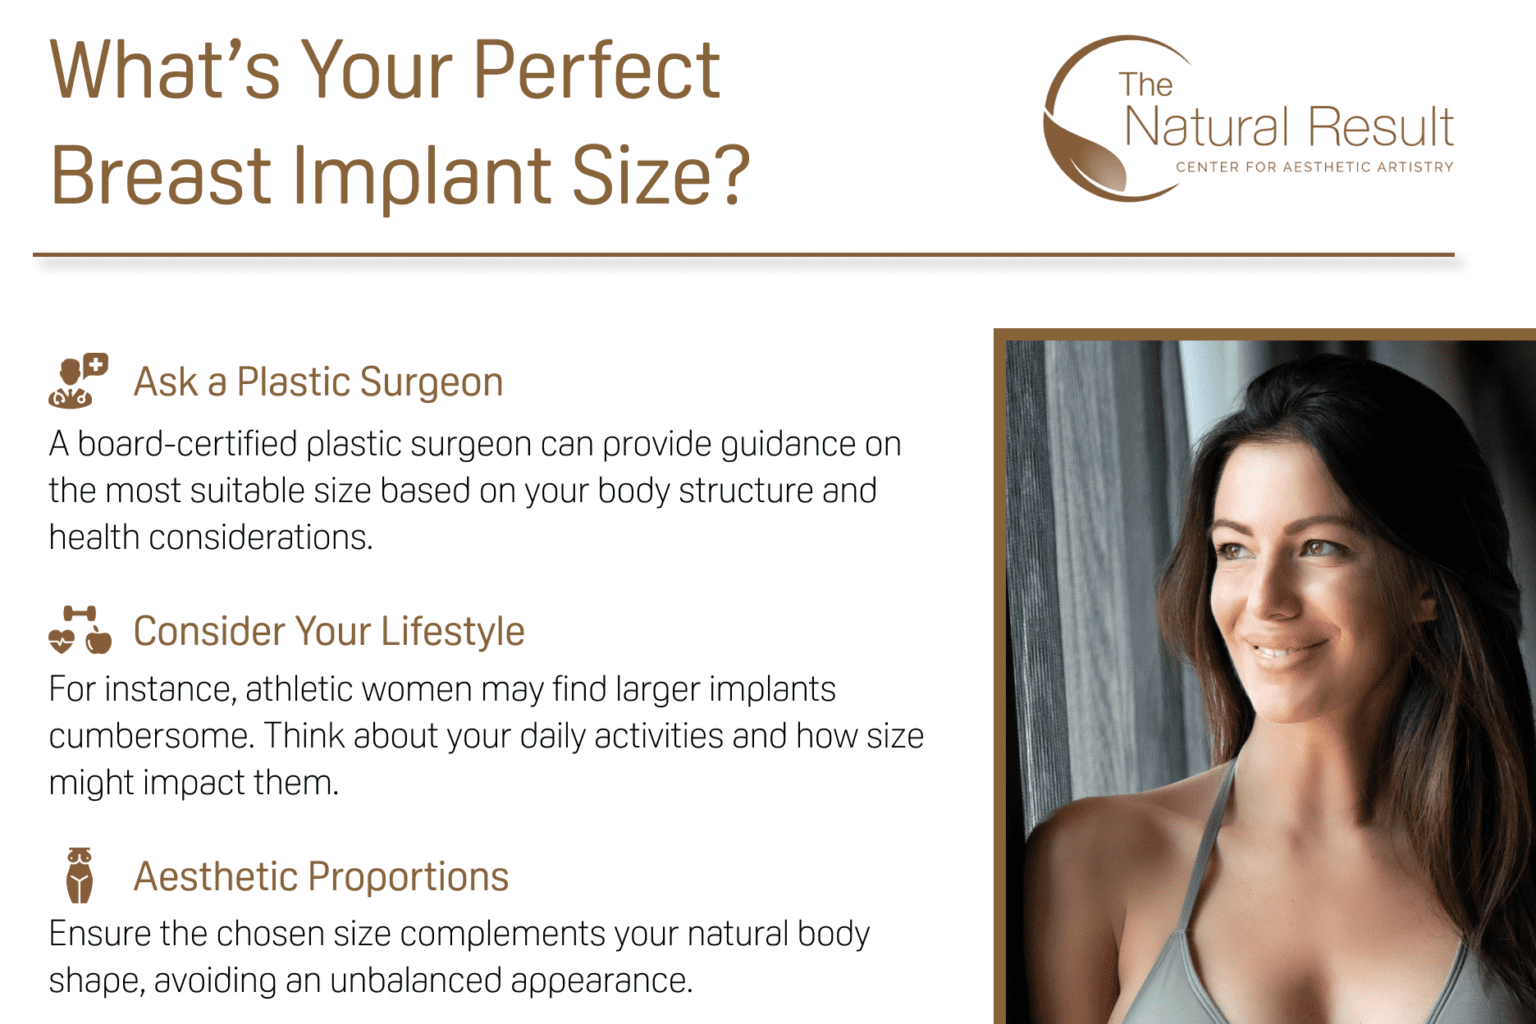 What's Your Perfect Breast Implant Size?